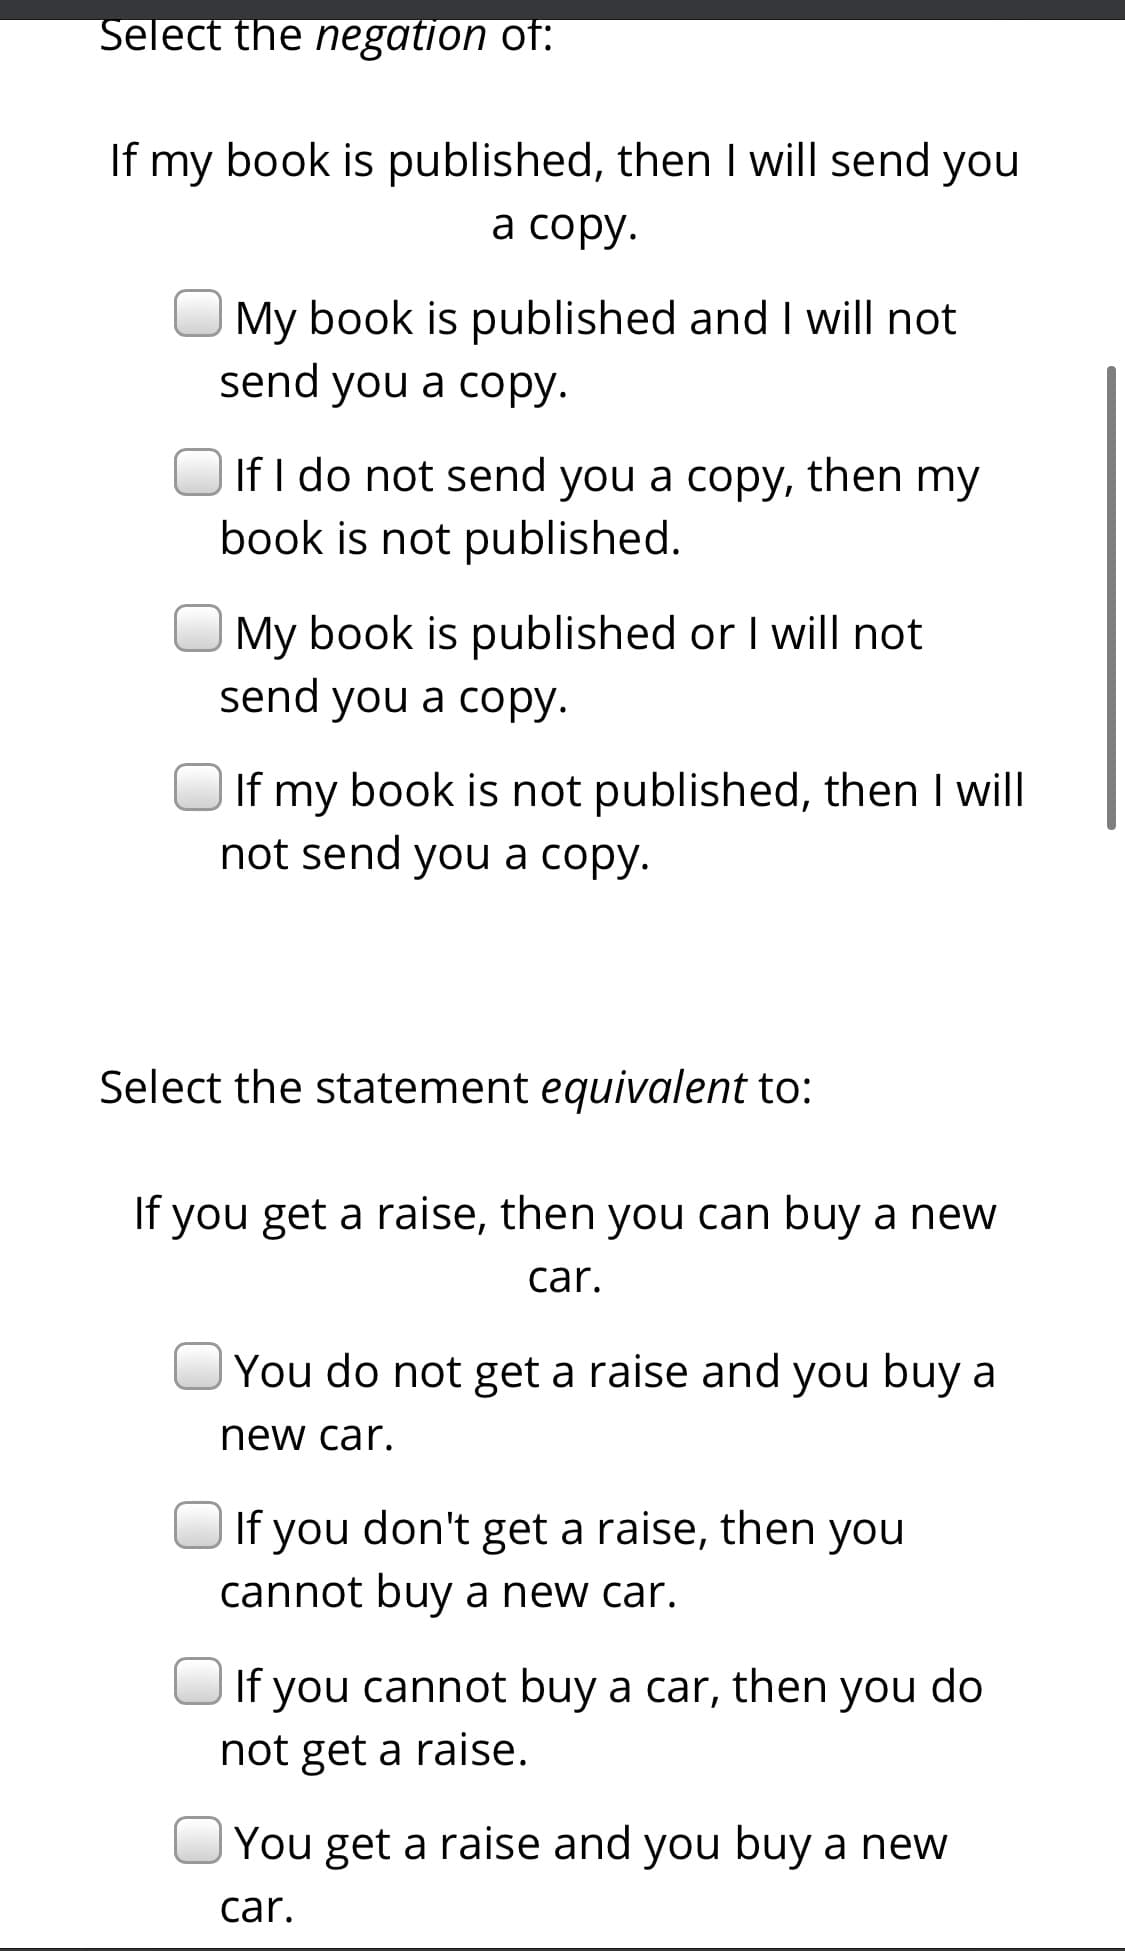 Select the negation of:
If my book is published, then I will send you
а сорy.
My book is published and I will not
send you a copy.
If I do not send you a copy, then my
book is not published.
My book is published or I will not
send you a copy.
If my book is not published, then I will
not send you a copy.
Select the statement equivalent to:
If you get a raise, then you can buy a new
car.
You do not get a raise and you buy a
new car.
If you don't get a raise, then you
cannot buy a new car.
If you cannot buy a car, then you do
not get a raise.
You get a raise and you buy a new
car.
